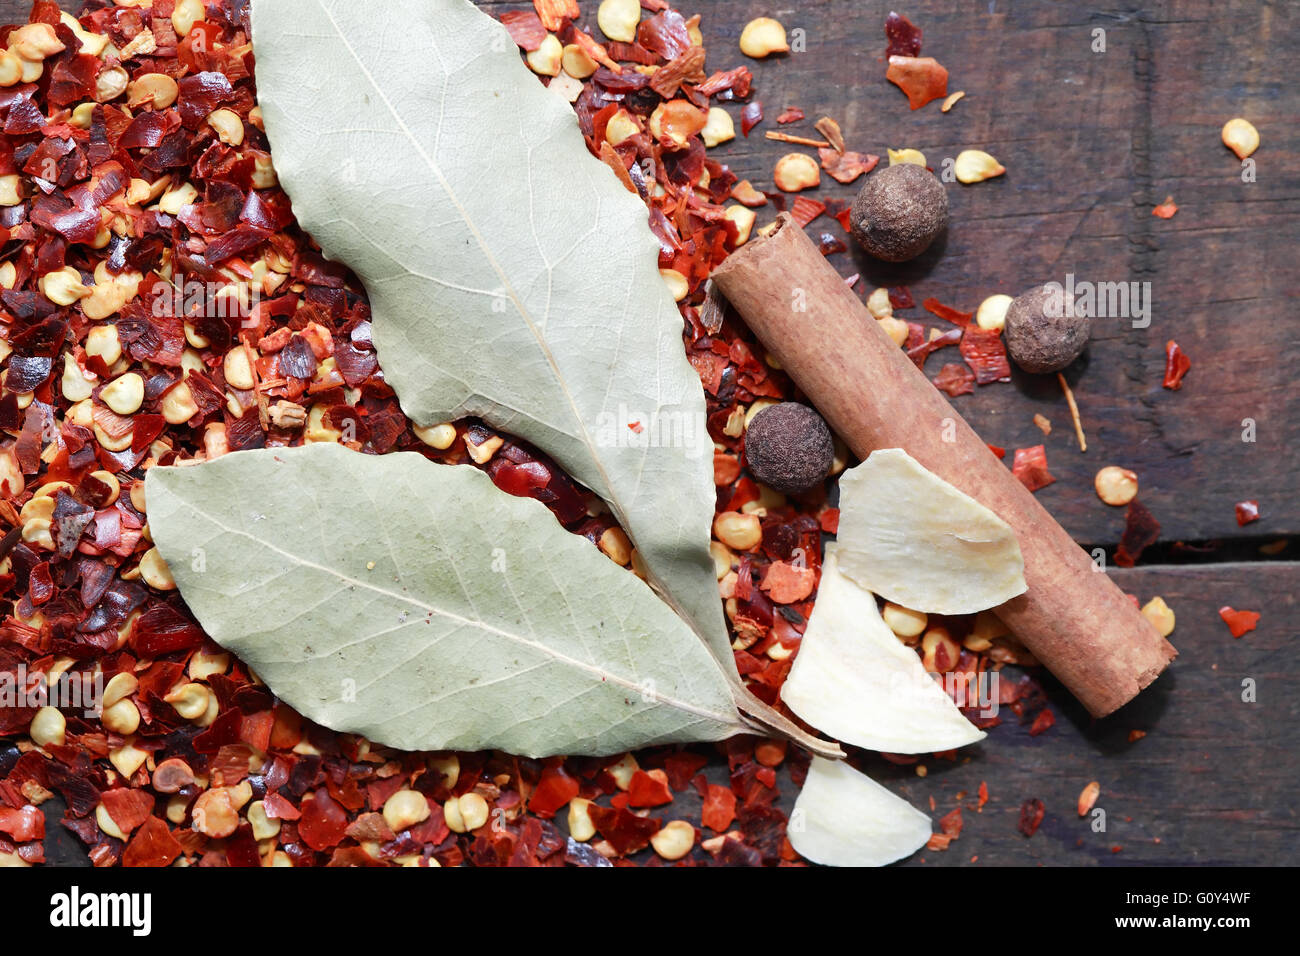 Set of various spice ingredients on old wooden background Stock Photo